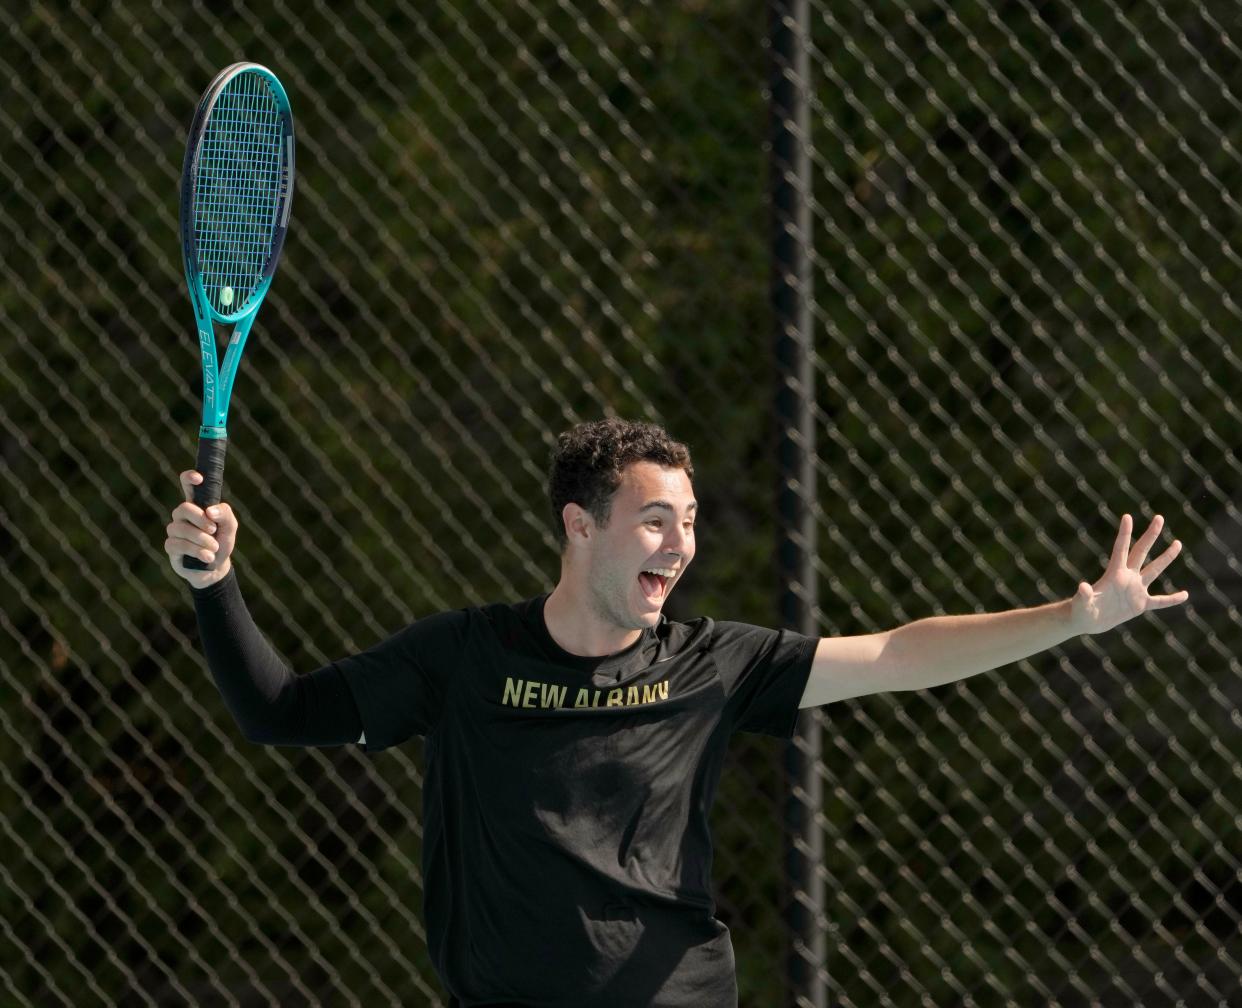 New Albany's Ben Bilenko is enjoying his senior season, which he hopes ends with a fourth consecutive trip to the Division I individual state tournament in doubles.